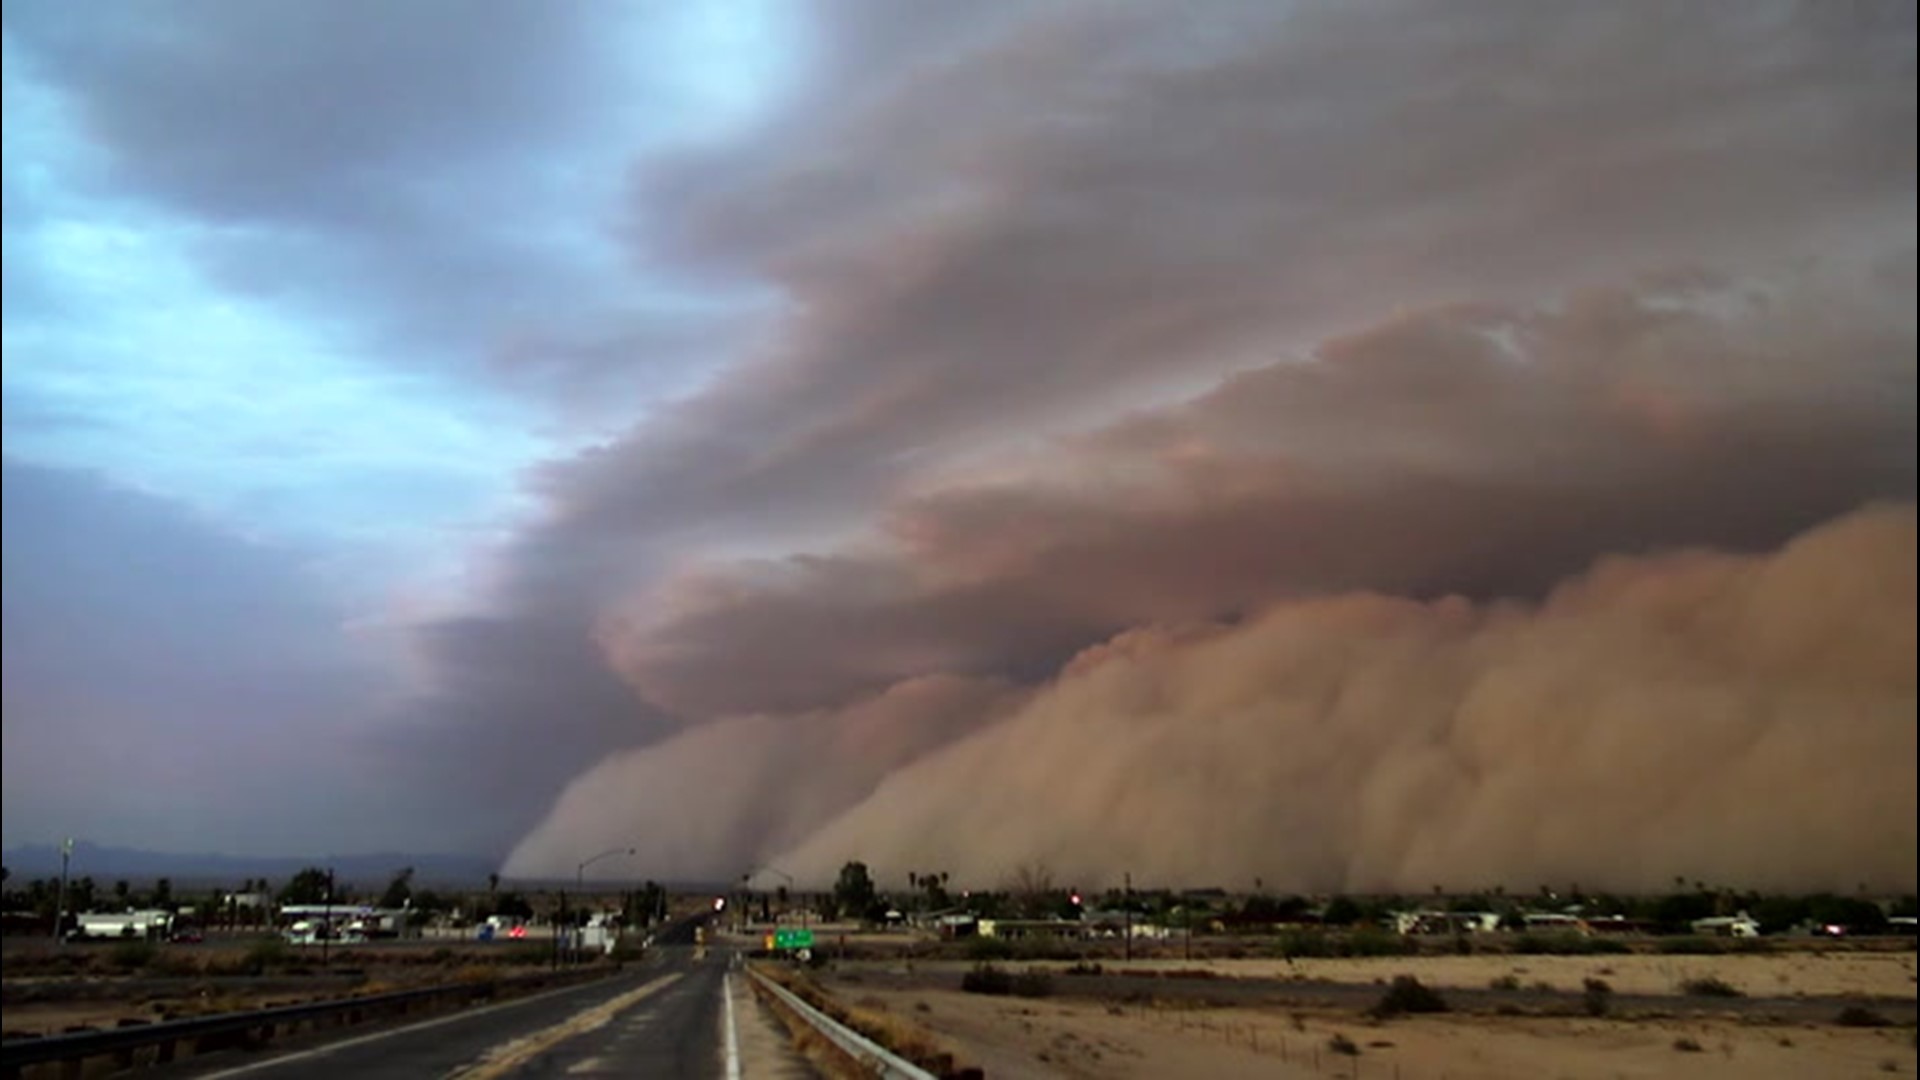 Photographers and weather lovers gathered in Tucson, Arizona on June 22 for the annual Monsoon Con event. The convention is dedicated to sharing photography and the science behind the Monsoon Season.